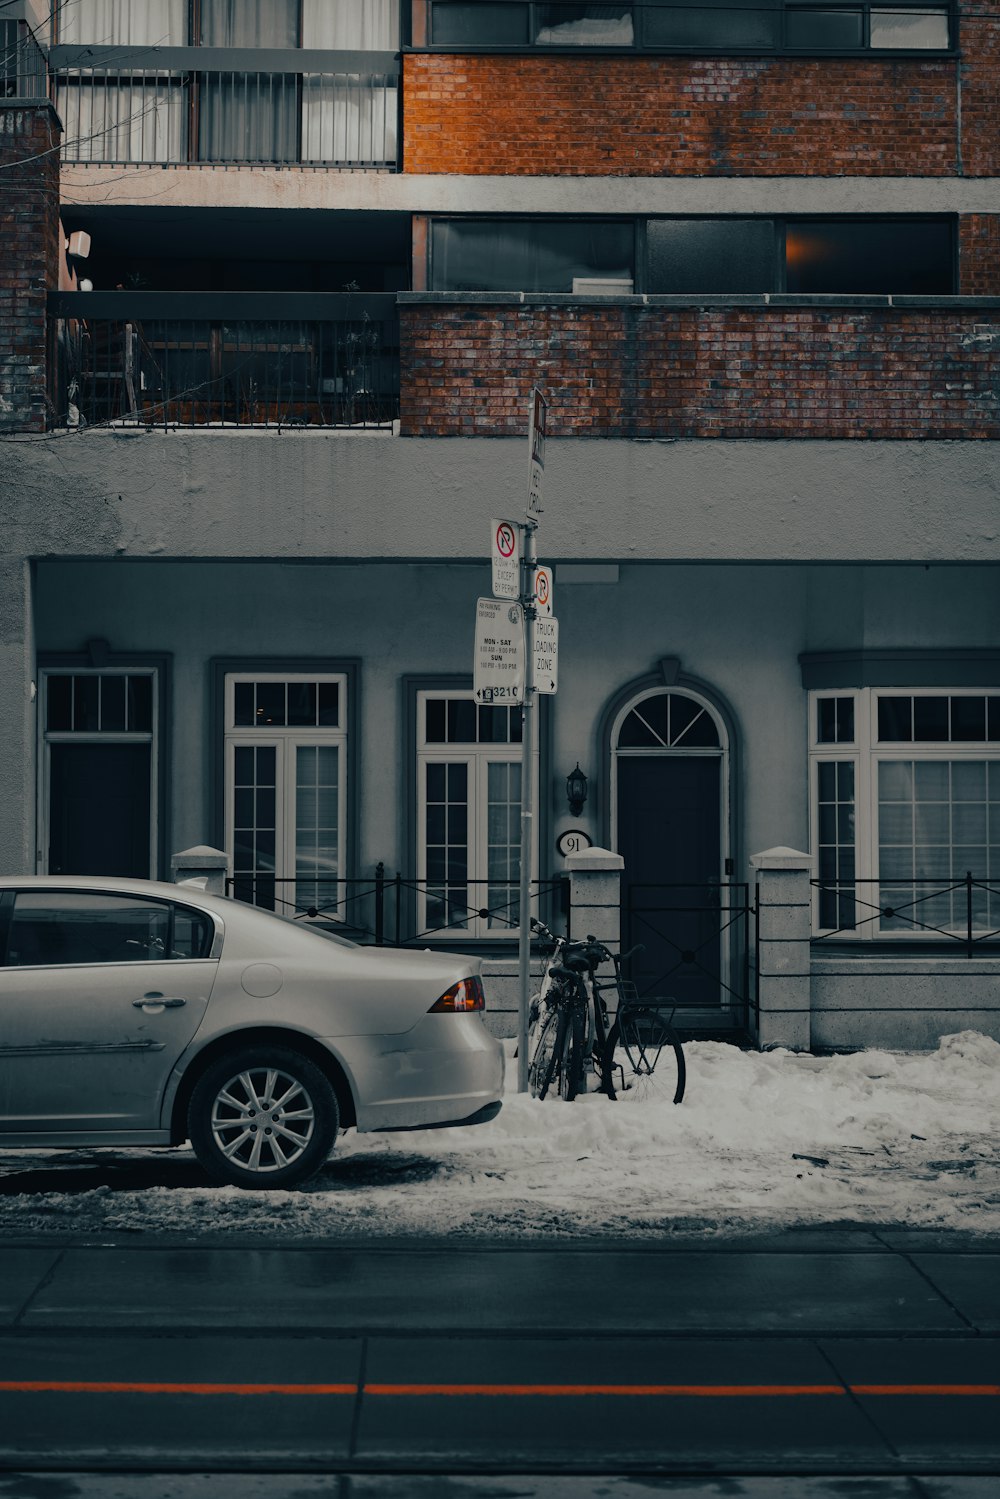 a car parked in front of a building on a snowy street